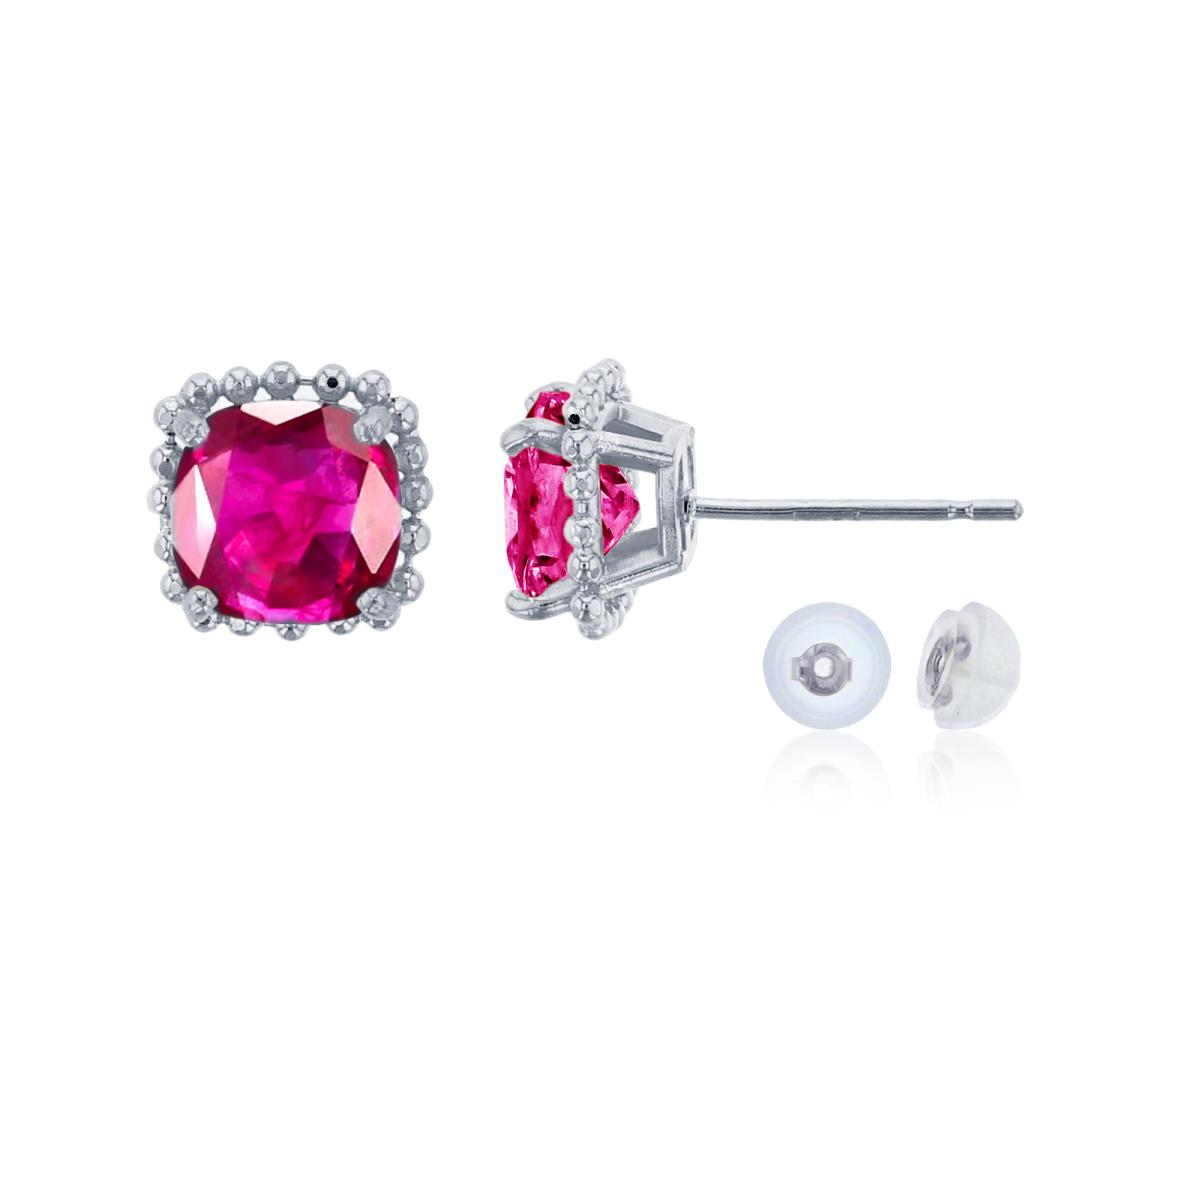 10K White Gold 6x6mm Cushion Cut Created Ruby Bead Frame Stud Earring with Silicone Back